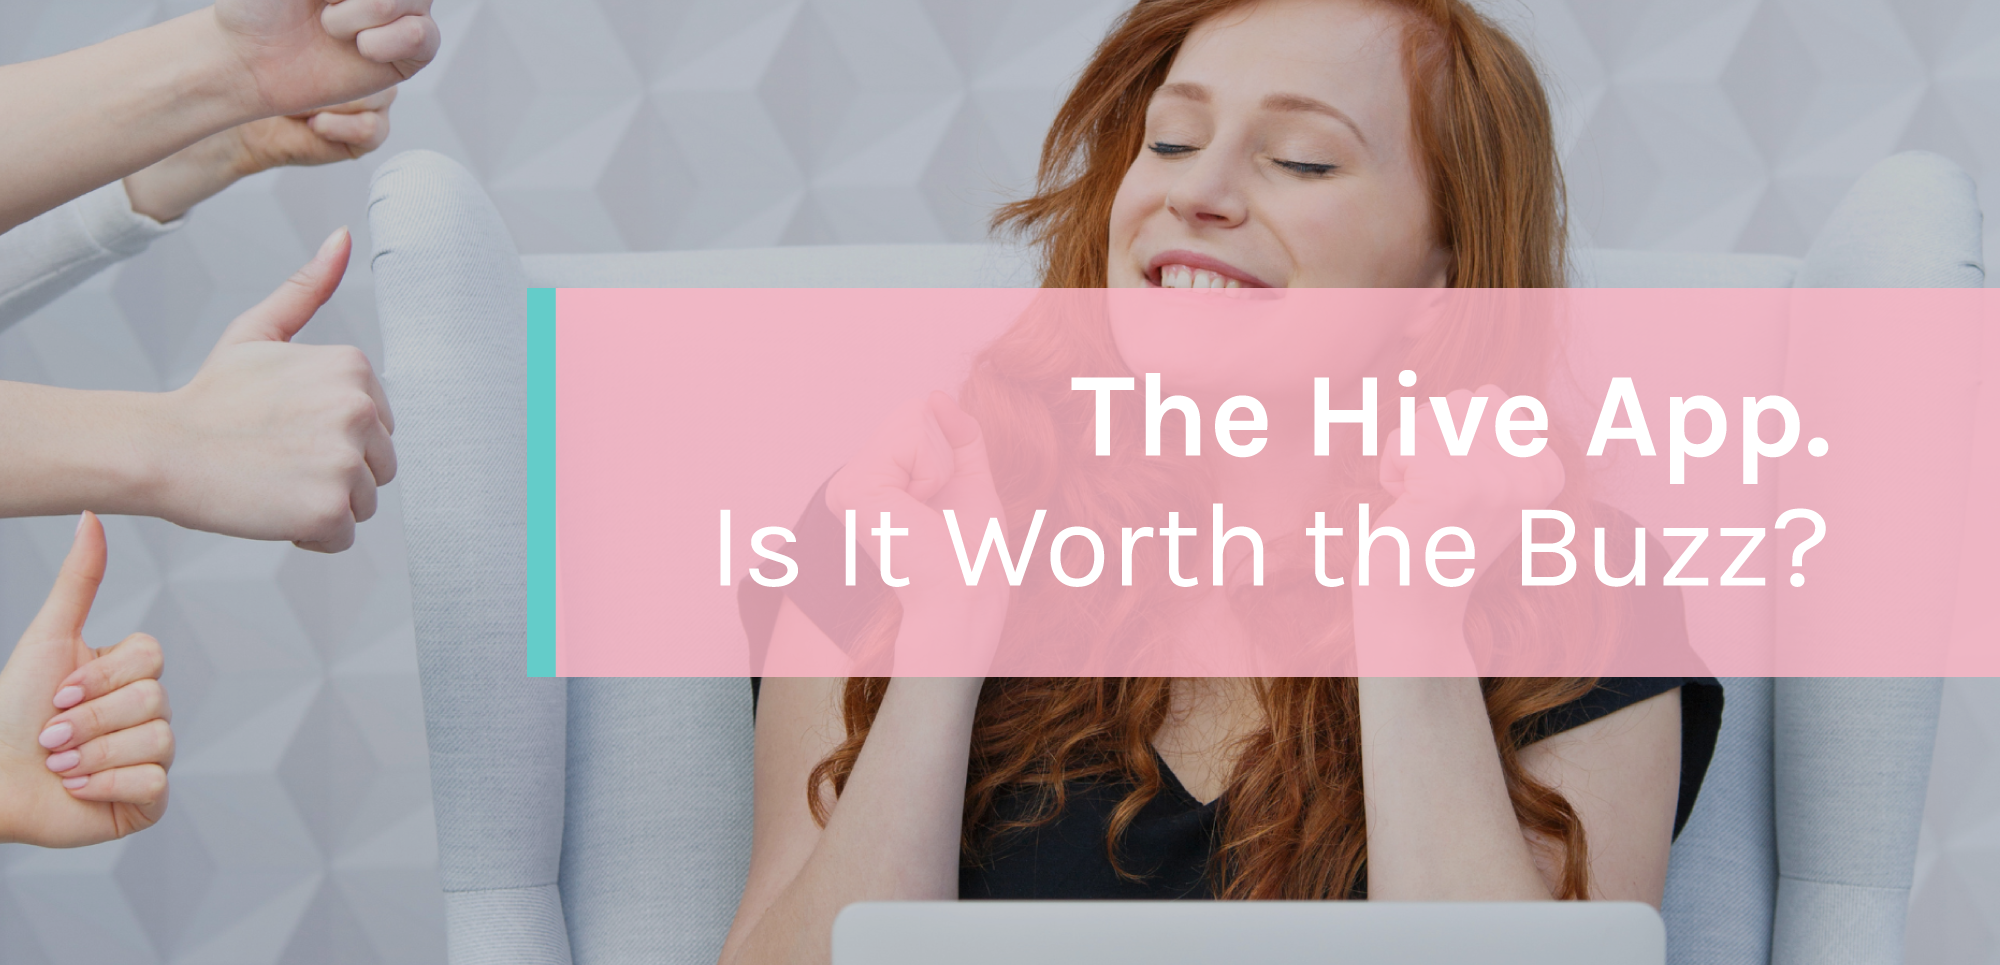 <strong>The Hive App. Is It Worth the Buzz?</strong>